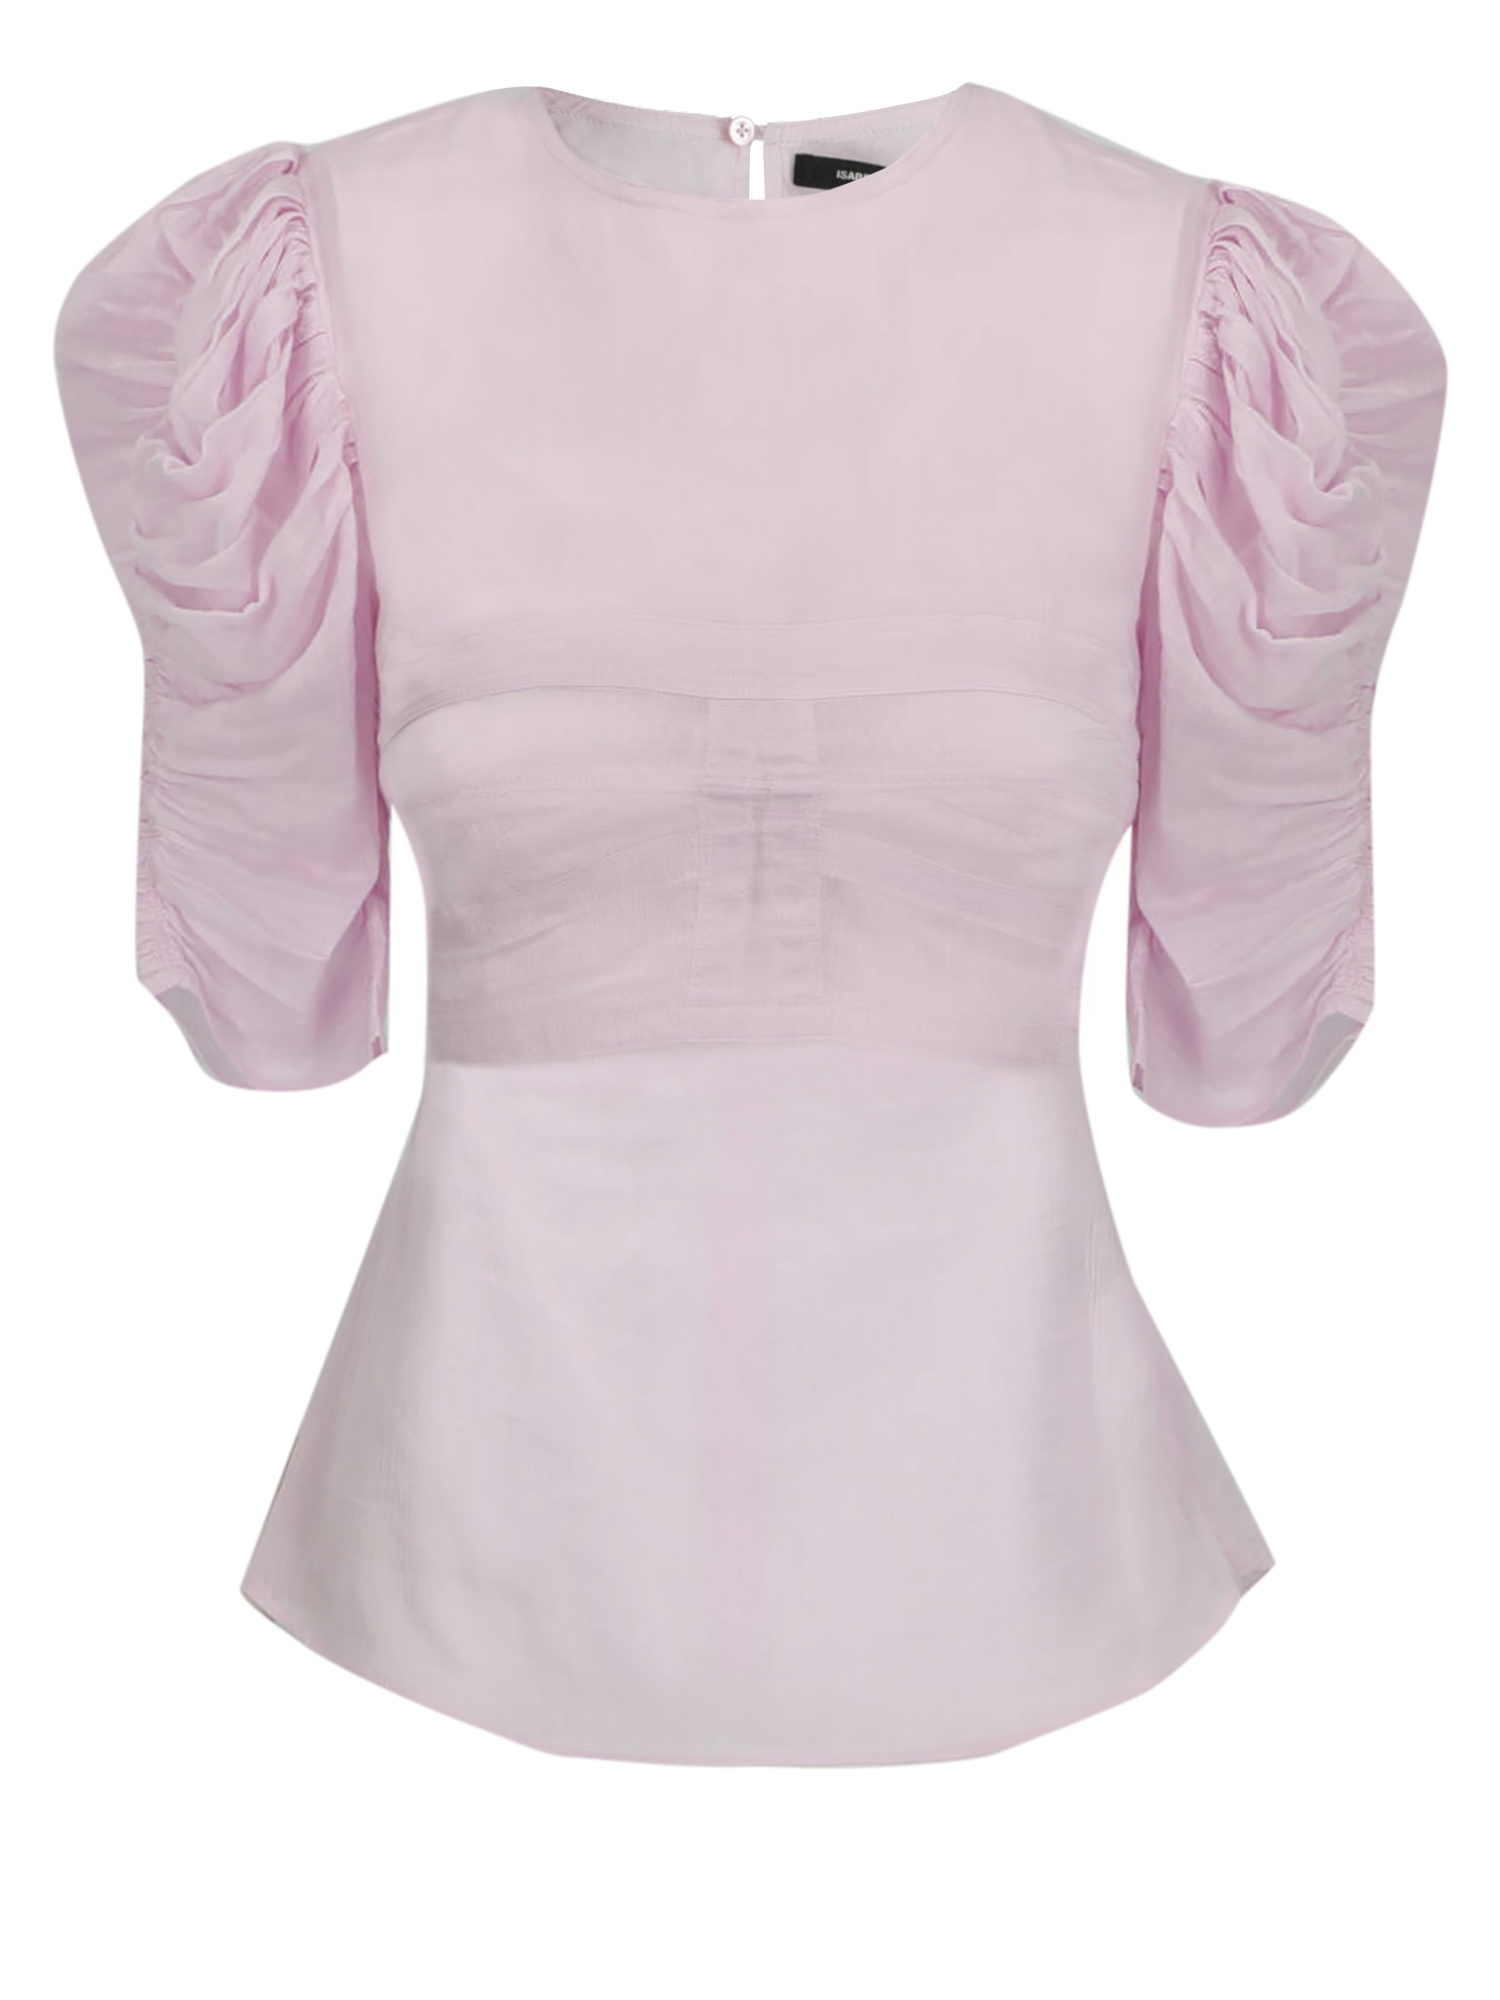 Condition: Very Good, Solid Color Cotton, Color: Pink - XS - FR 34 -